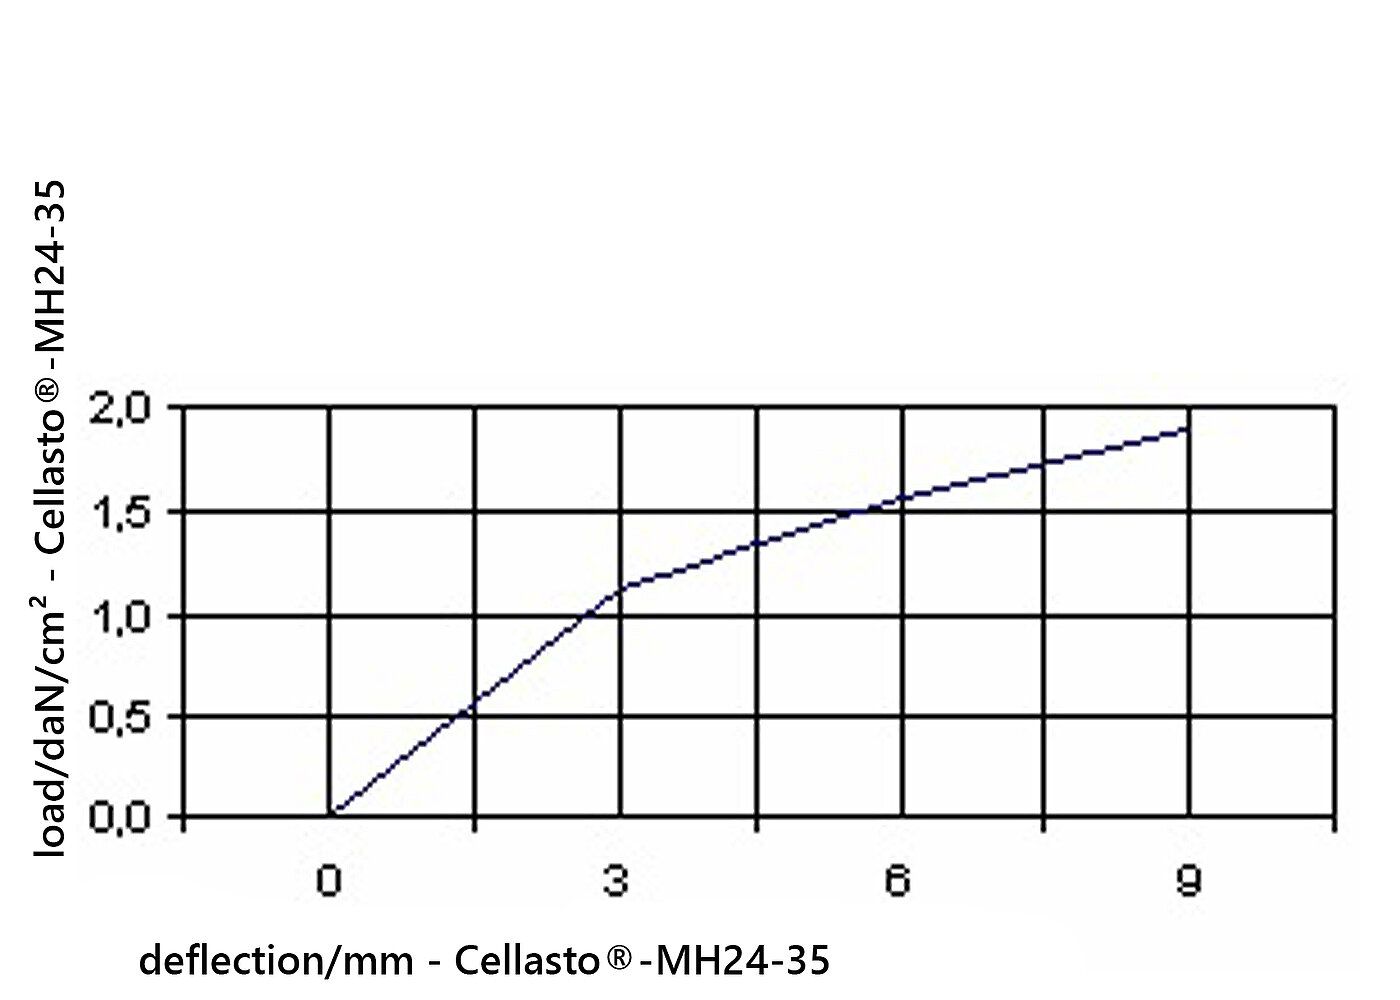 diagramme of the deflection of the elastomer board Cellasto®MH24-35 under load 